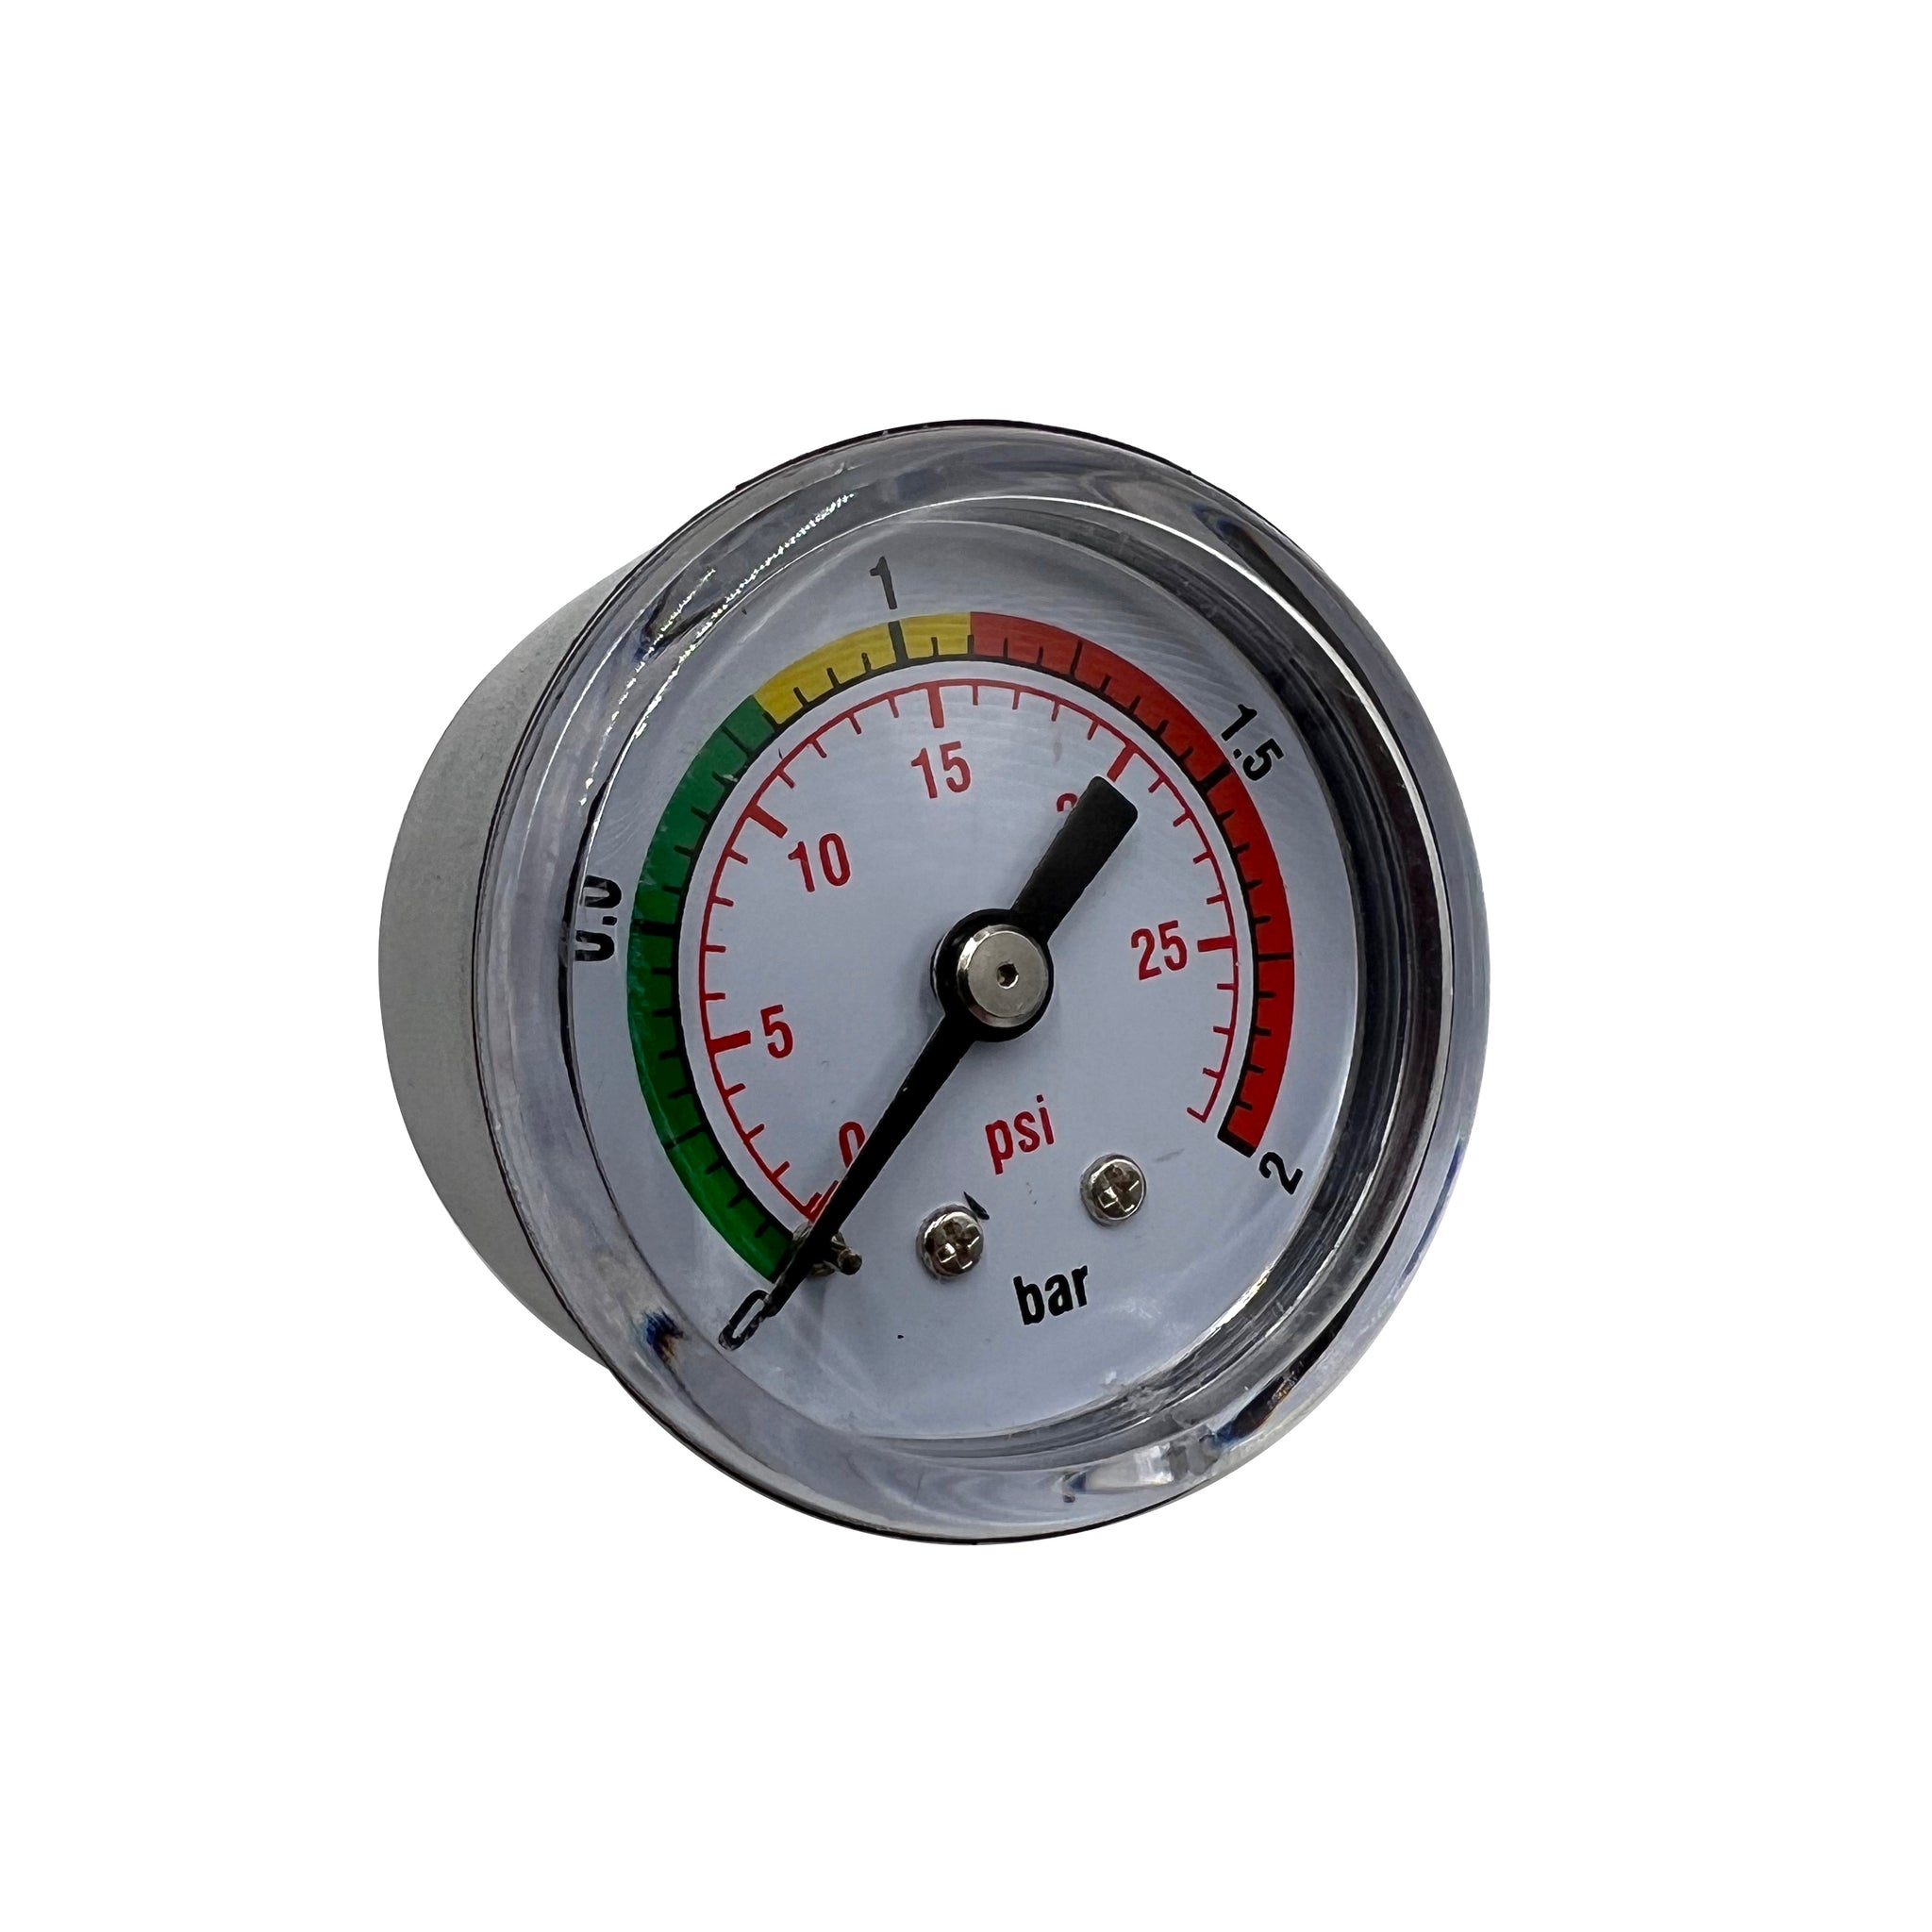 Pressure Gauge for Clearguard Pressurized Filter Systems